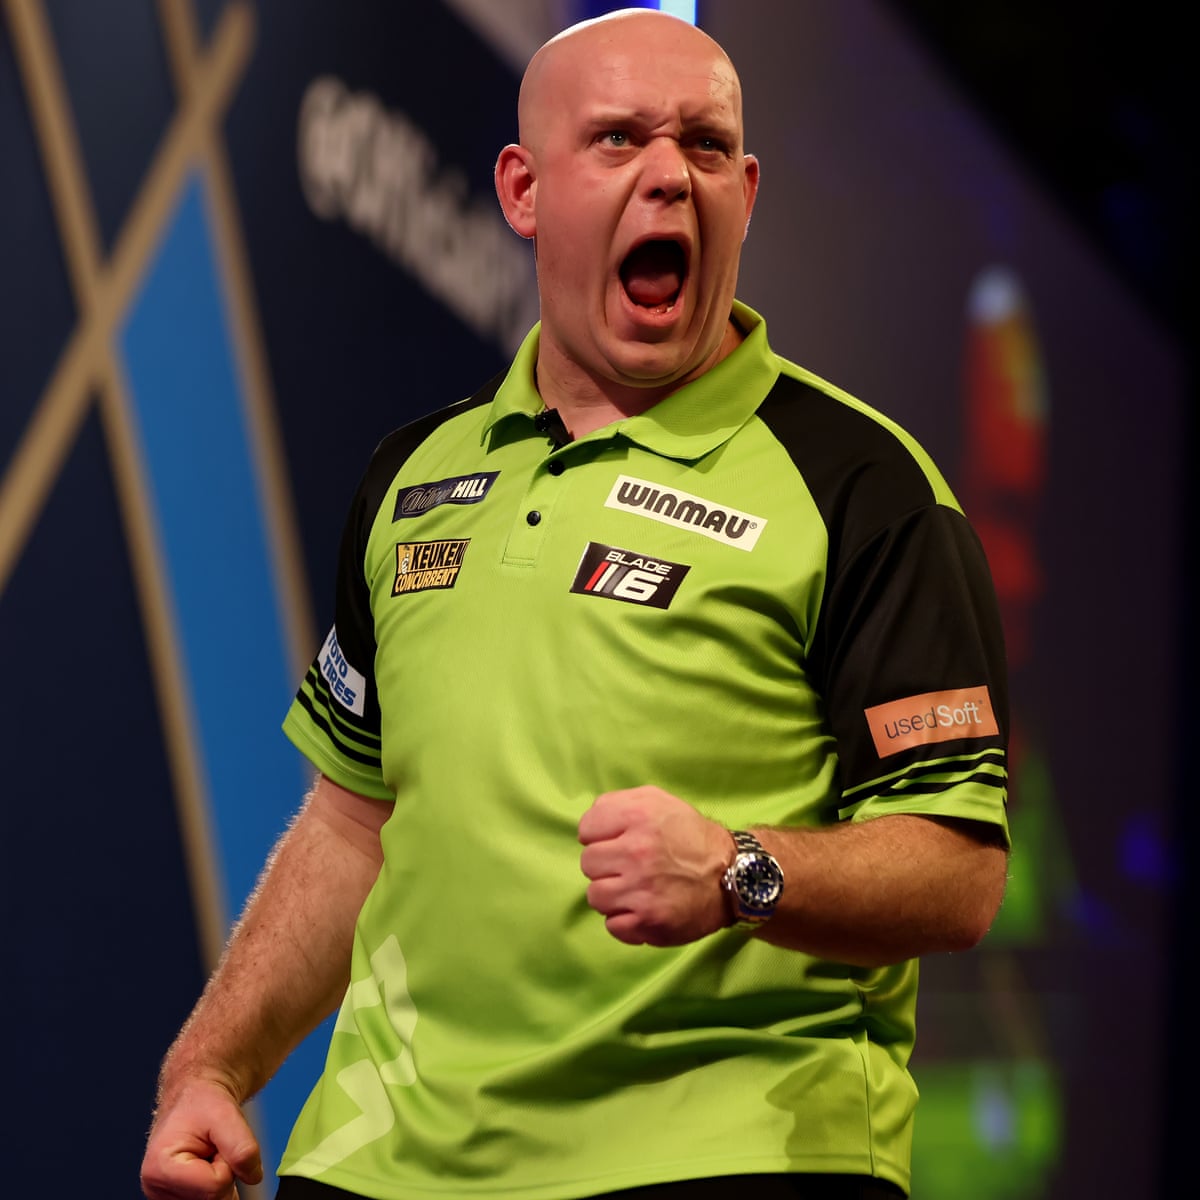 D.w.z Kwik jeugd Michael van Gerwen hits out at PDC after Covid test ends world title hopes  | Darts | The Guardian